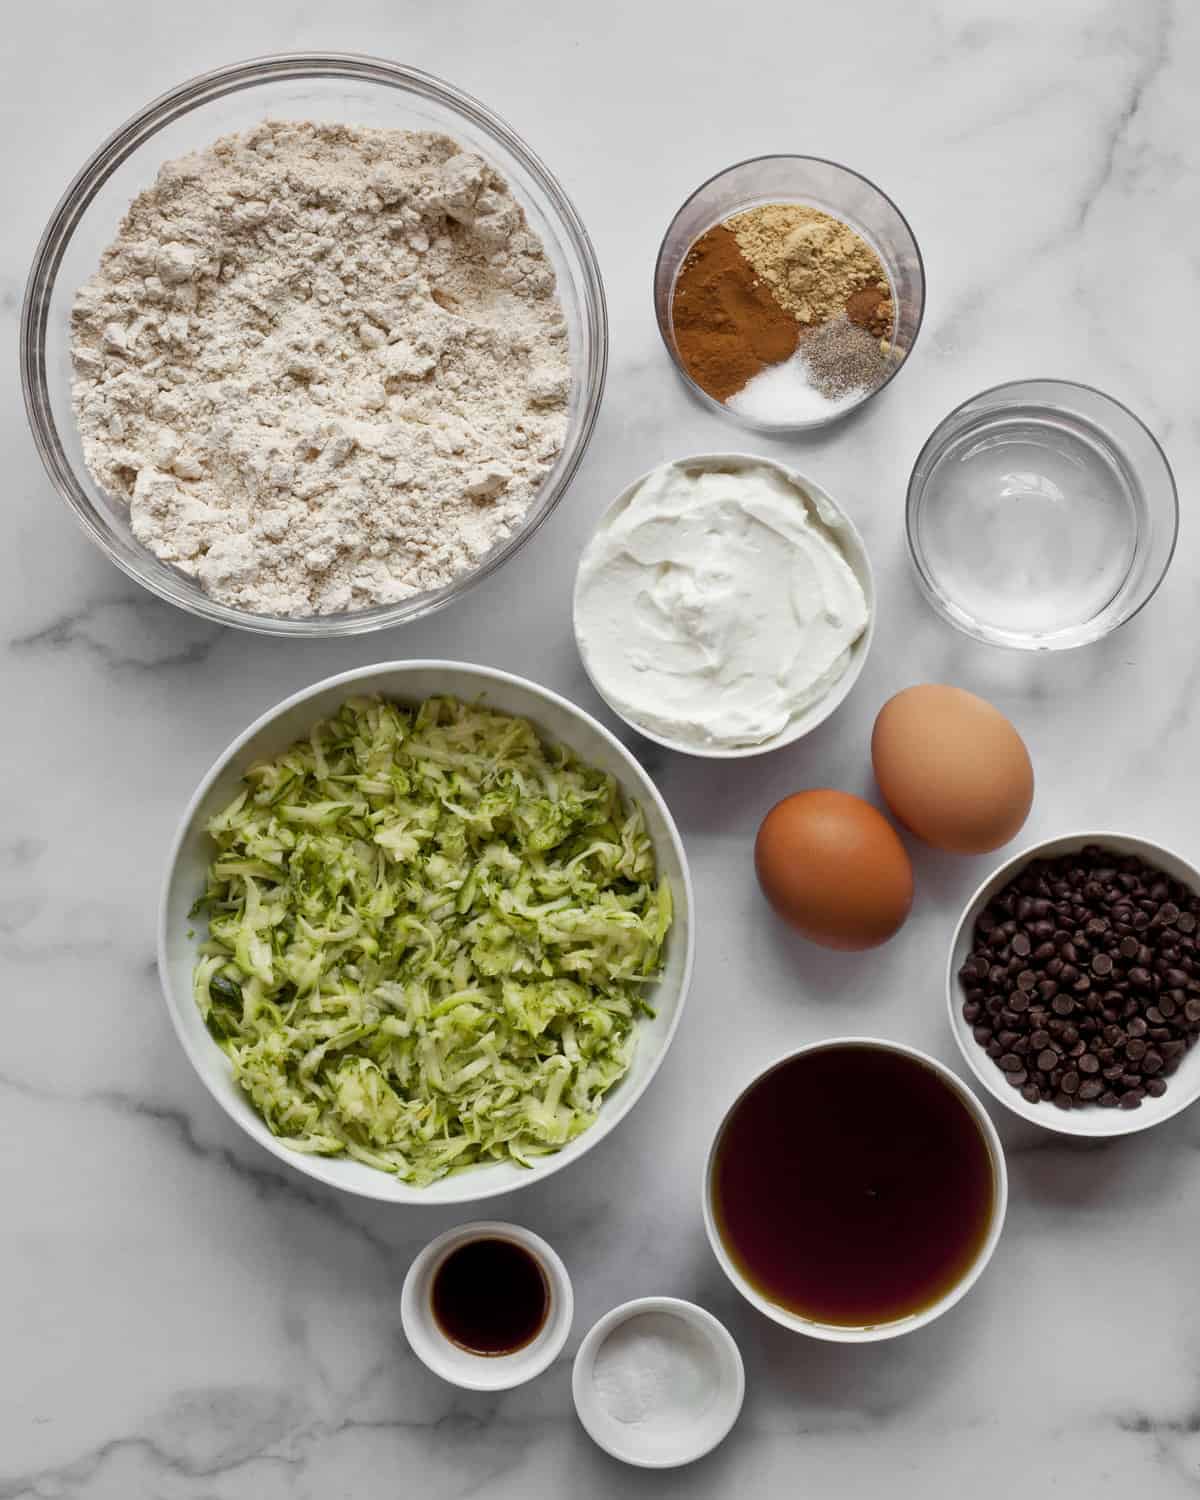 Ingredients including flour, shredded zucchini, eggs, vanilla extract, yogurt and spices.